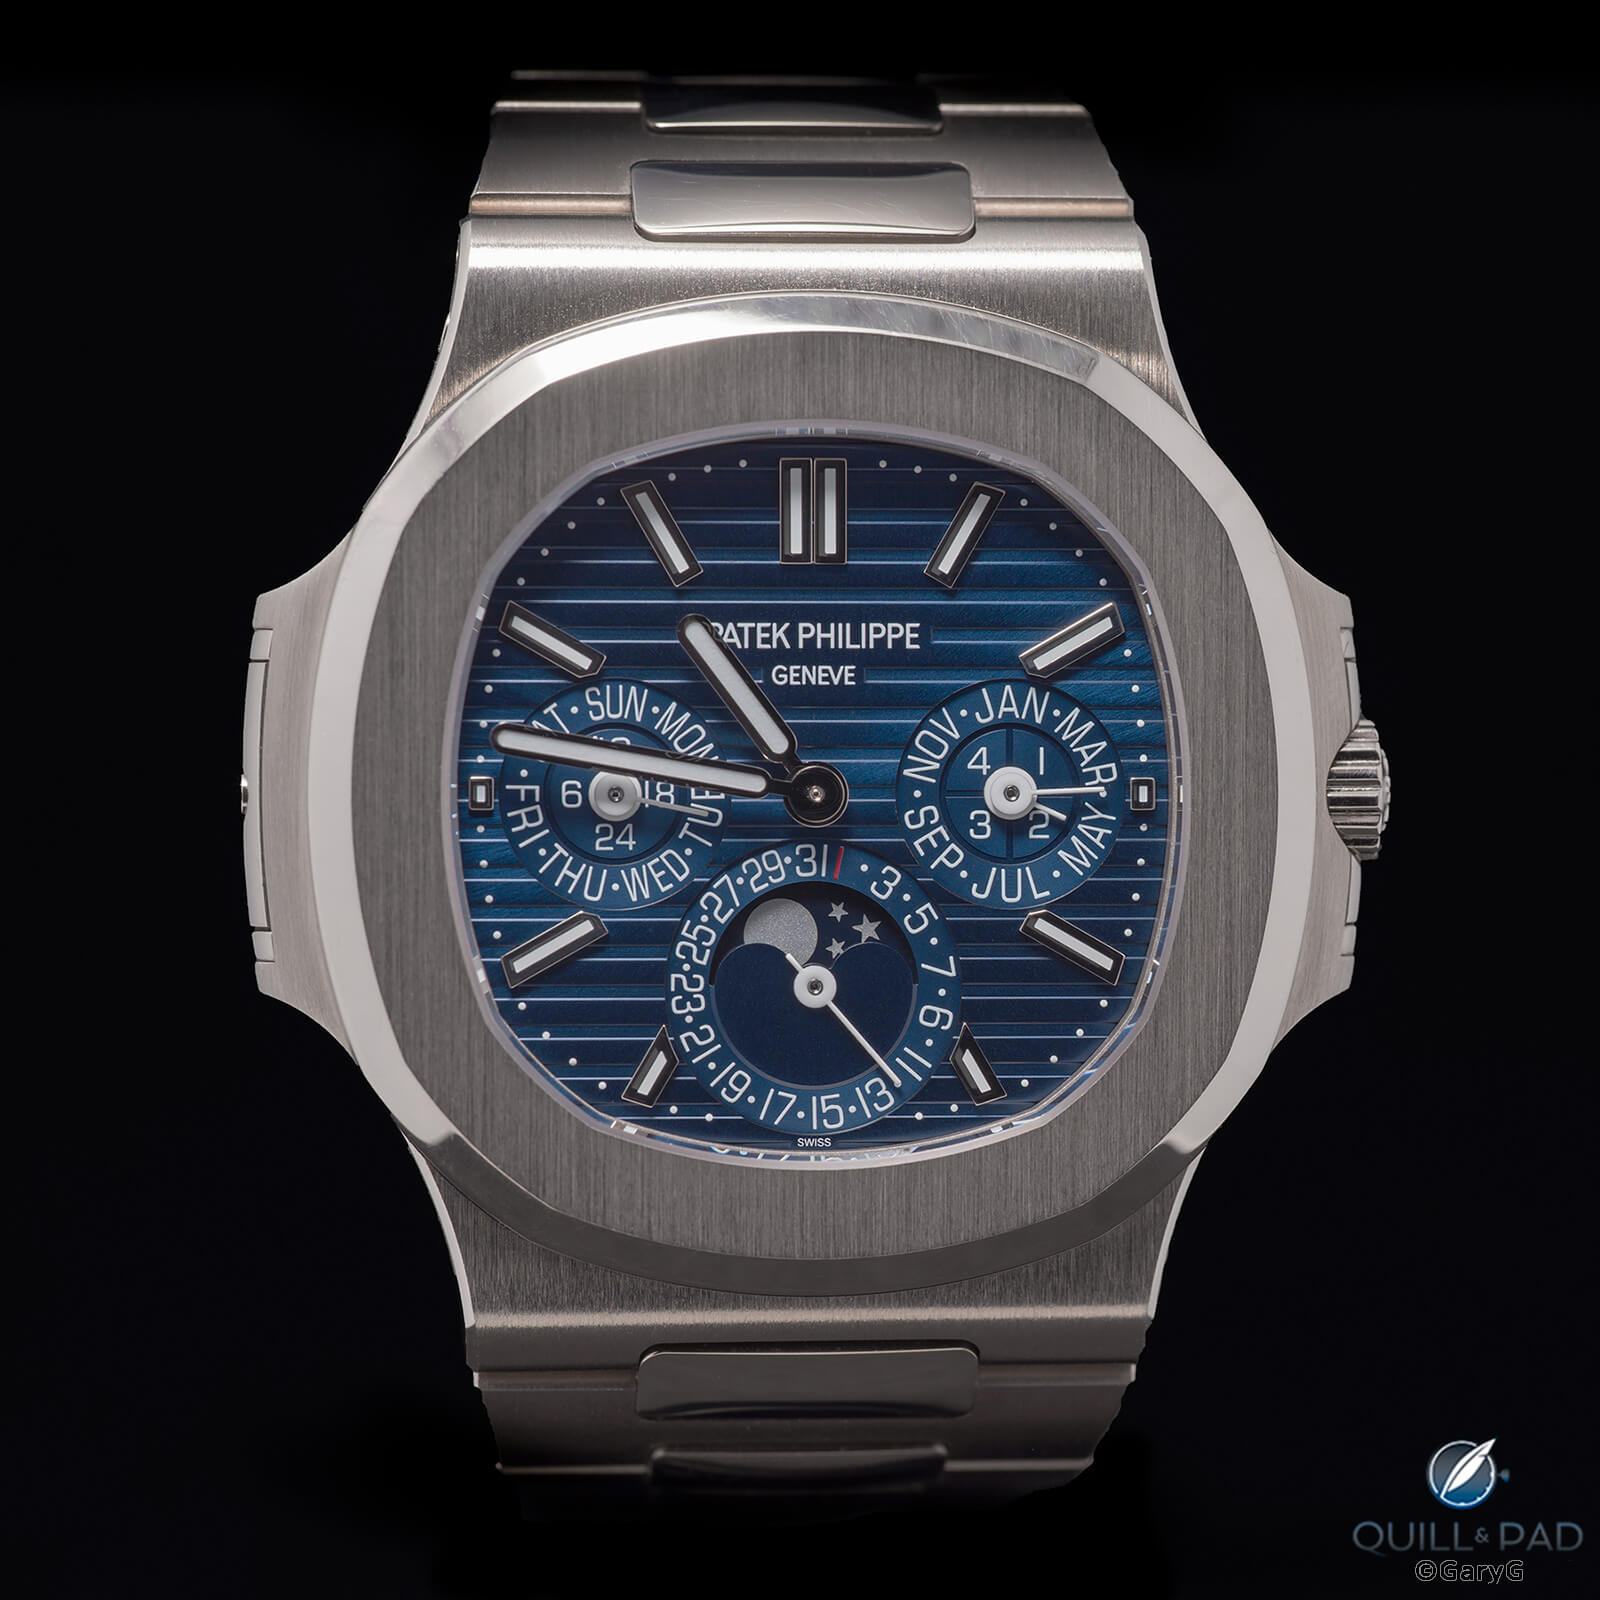 Why I Bought It: Patek Philippe Reference 5740/1G-001 Nautilus